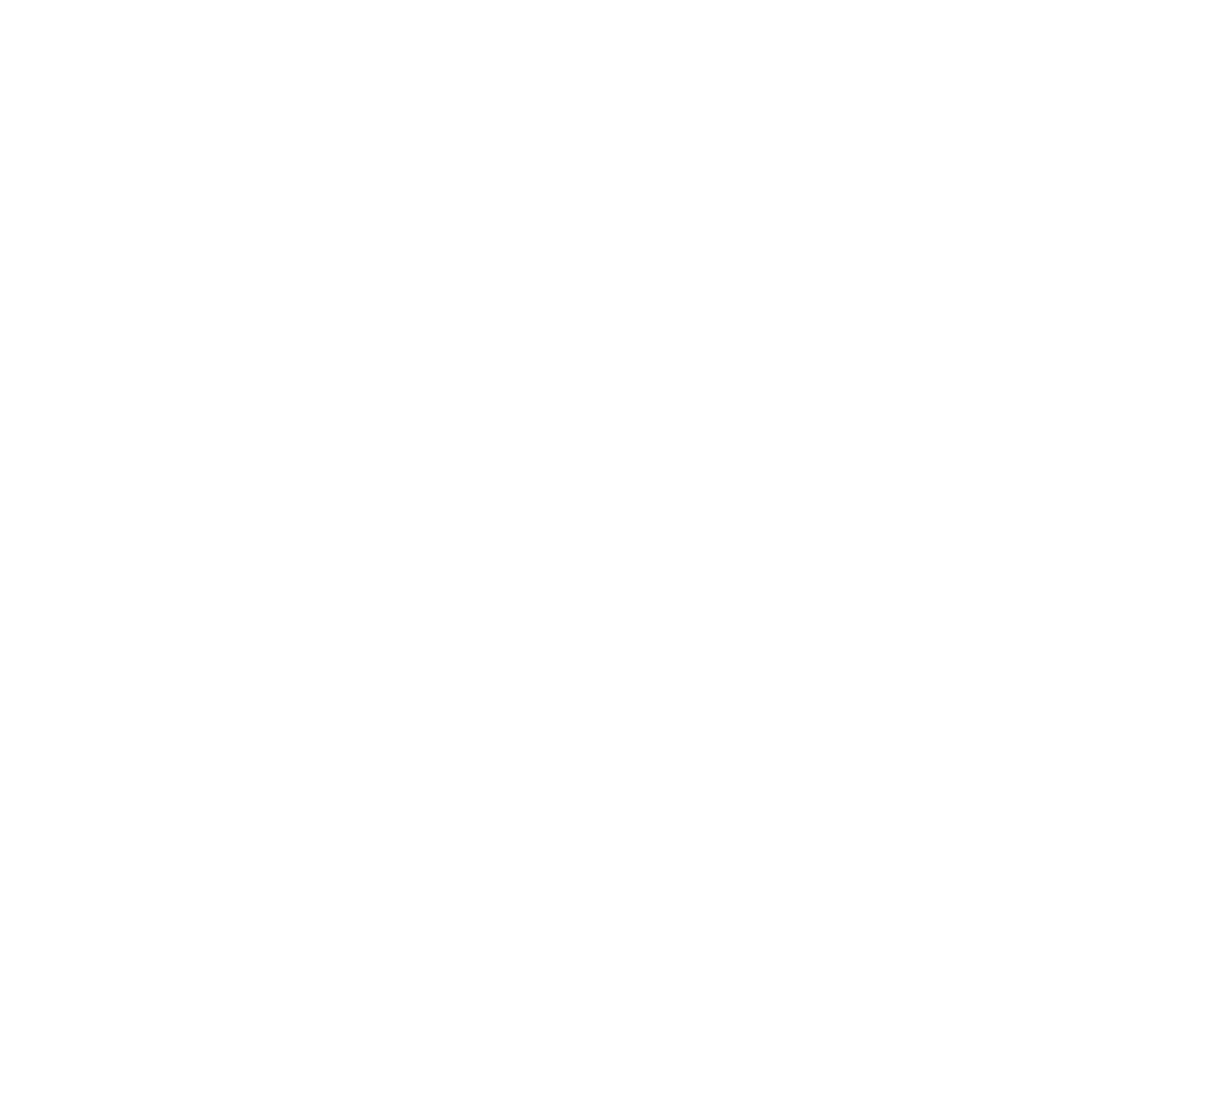 Community Foundations National Standards Seal